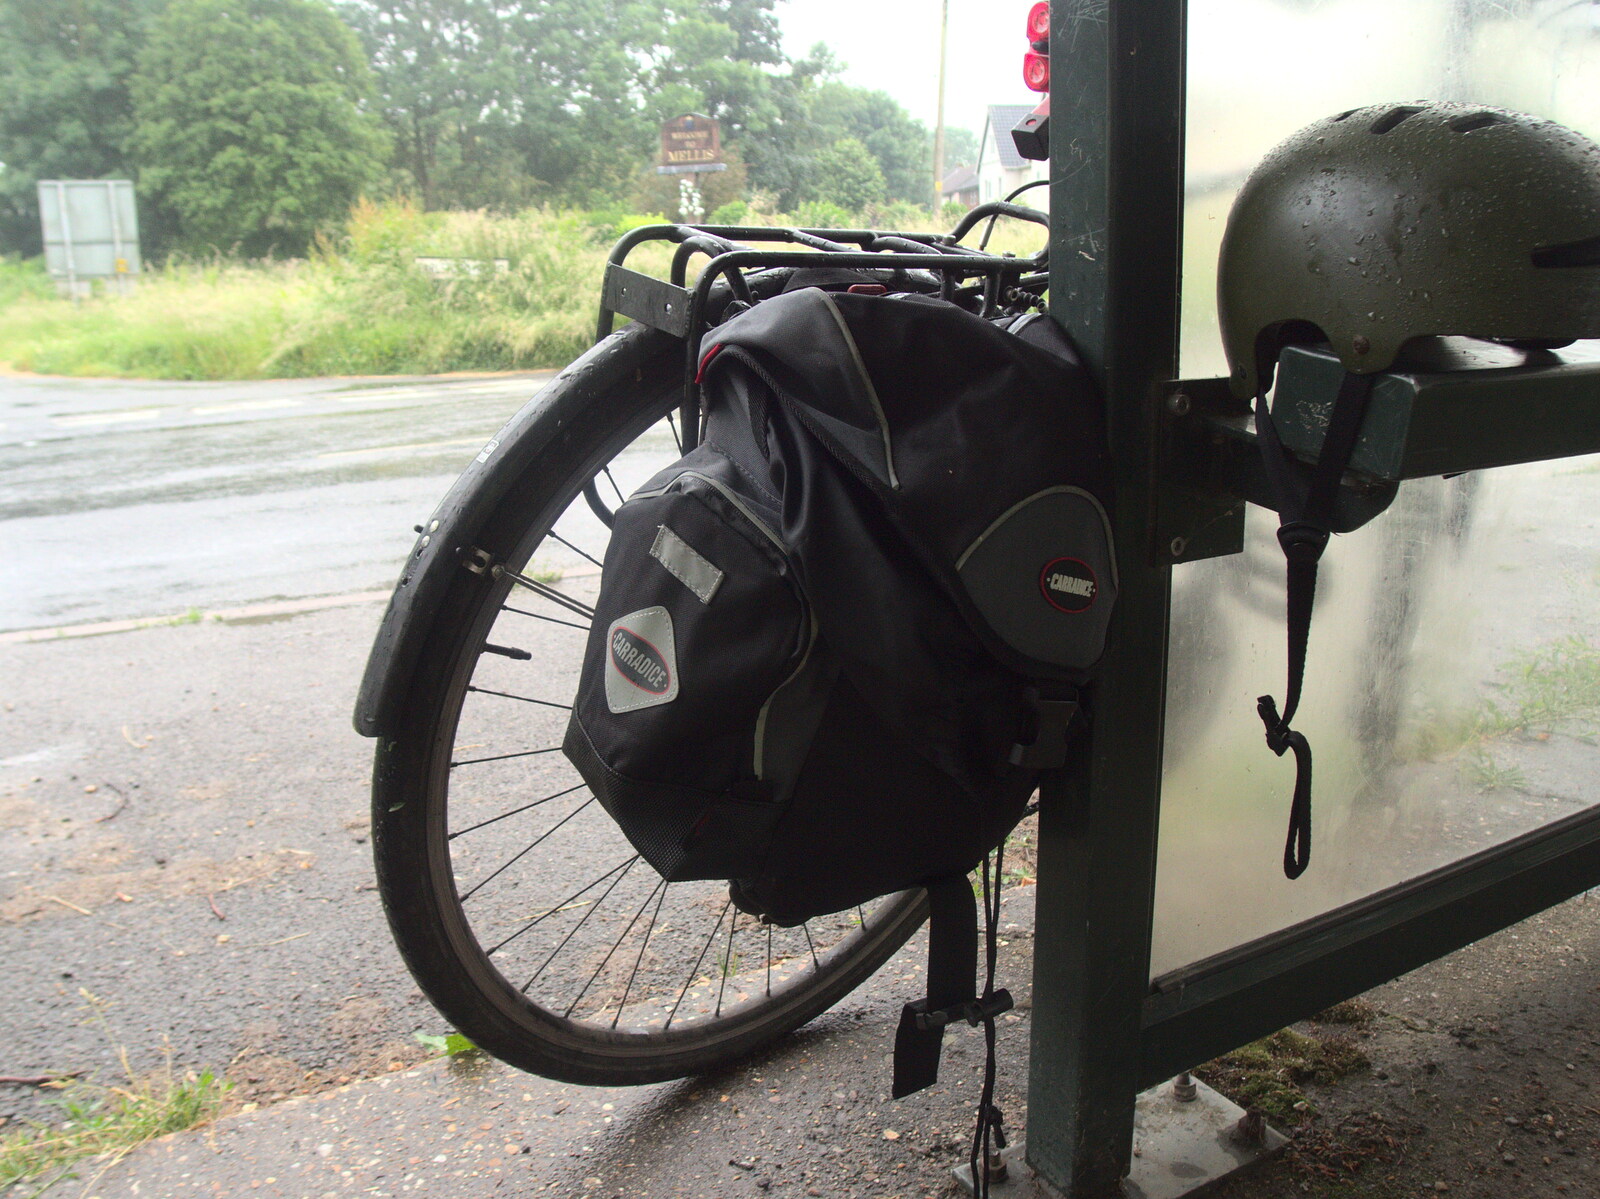 The bike in the rain from A BSCC Ride to Pulham Market, Norfolk - 17th June 2021